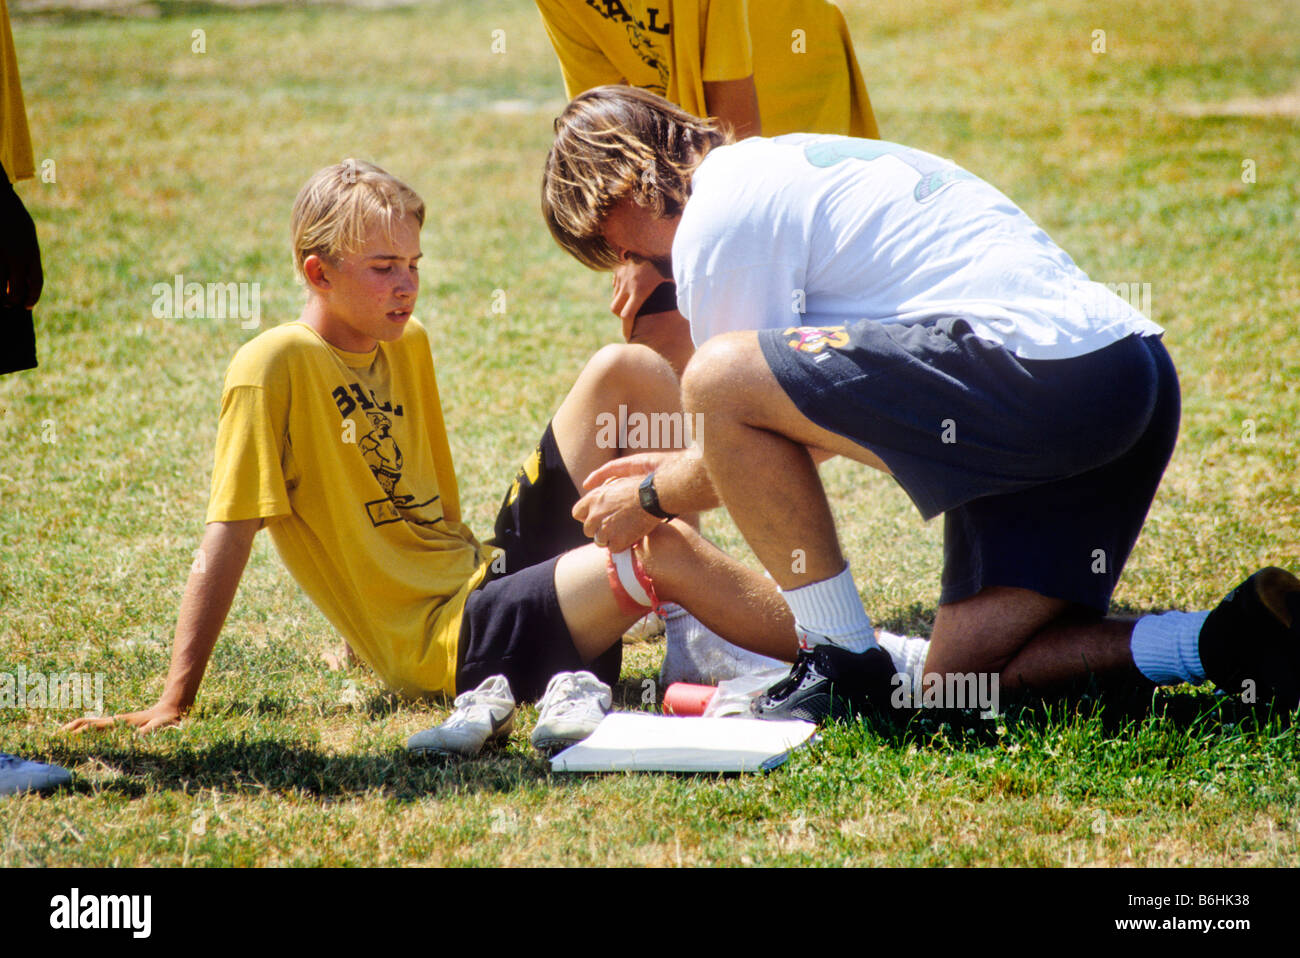 Coach attends injured player in Junior High School football game. Stock Photo